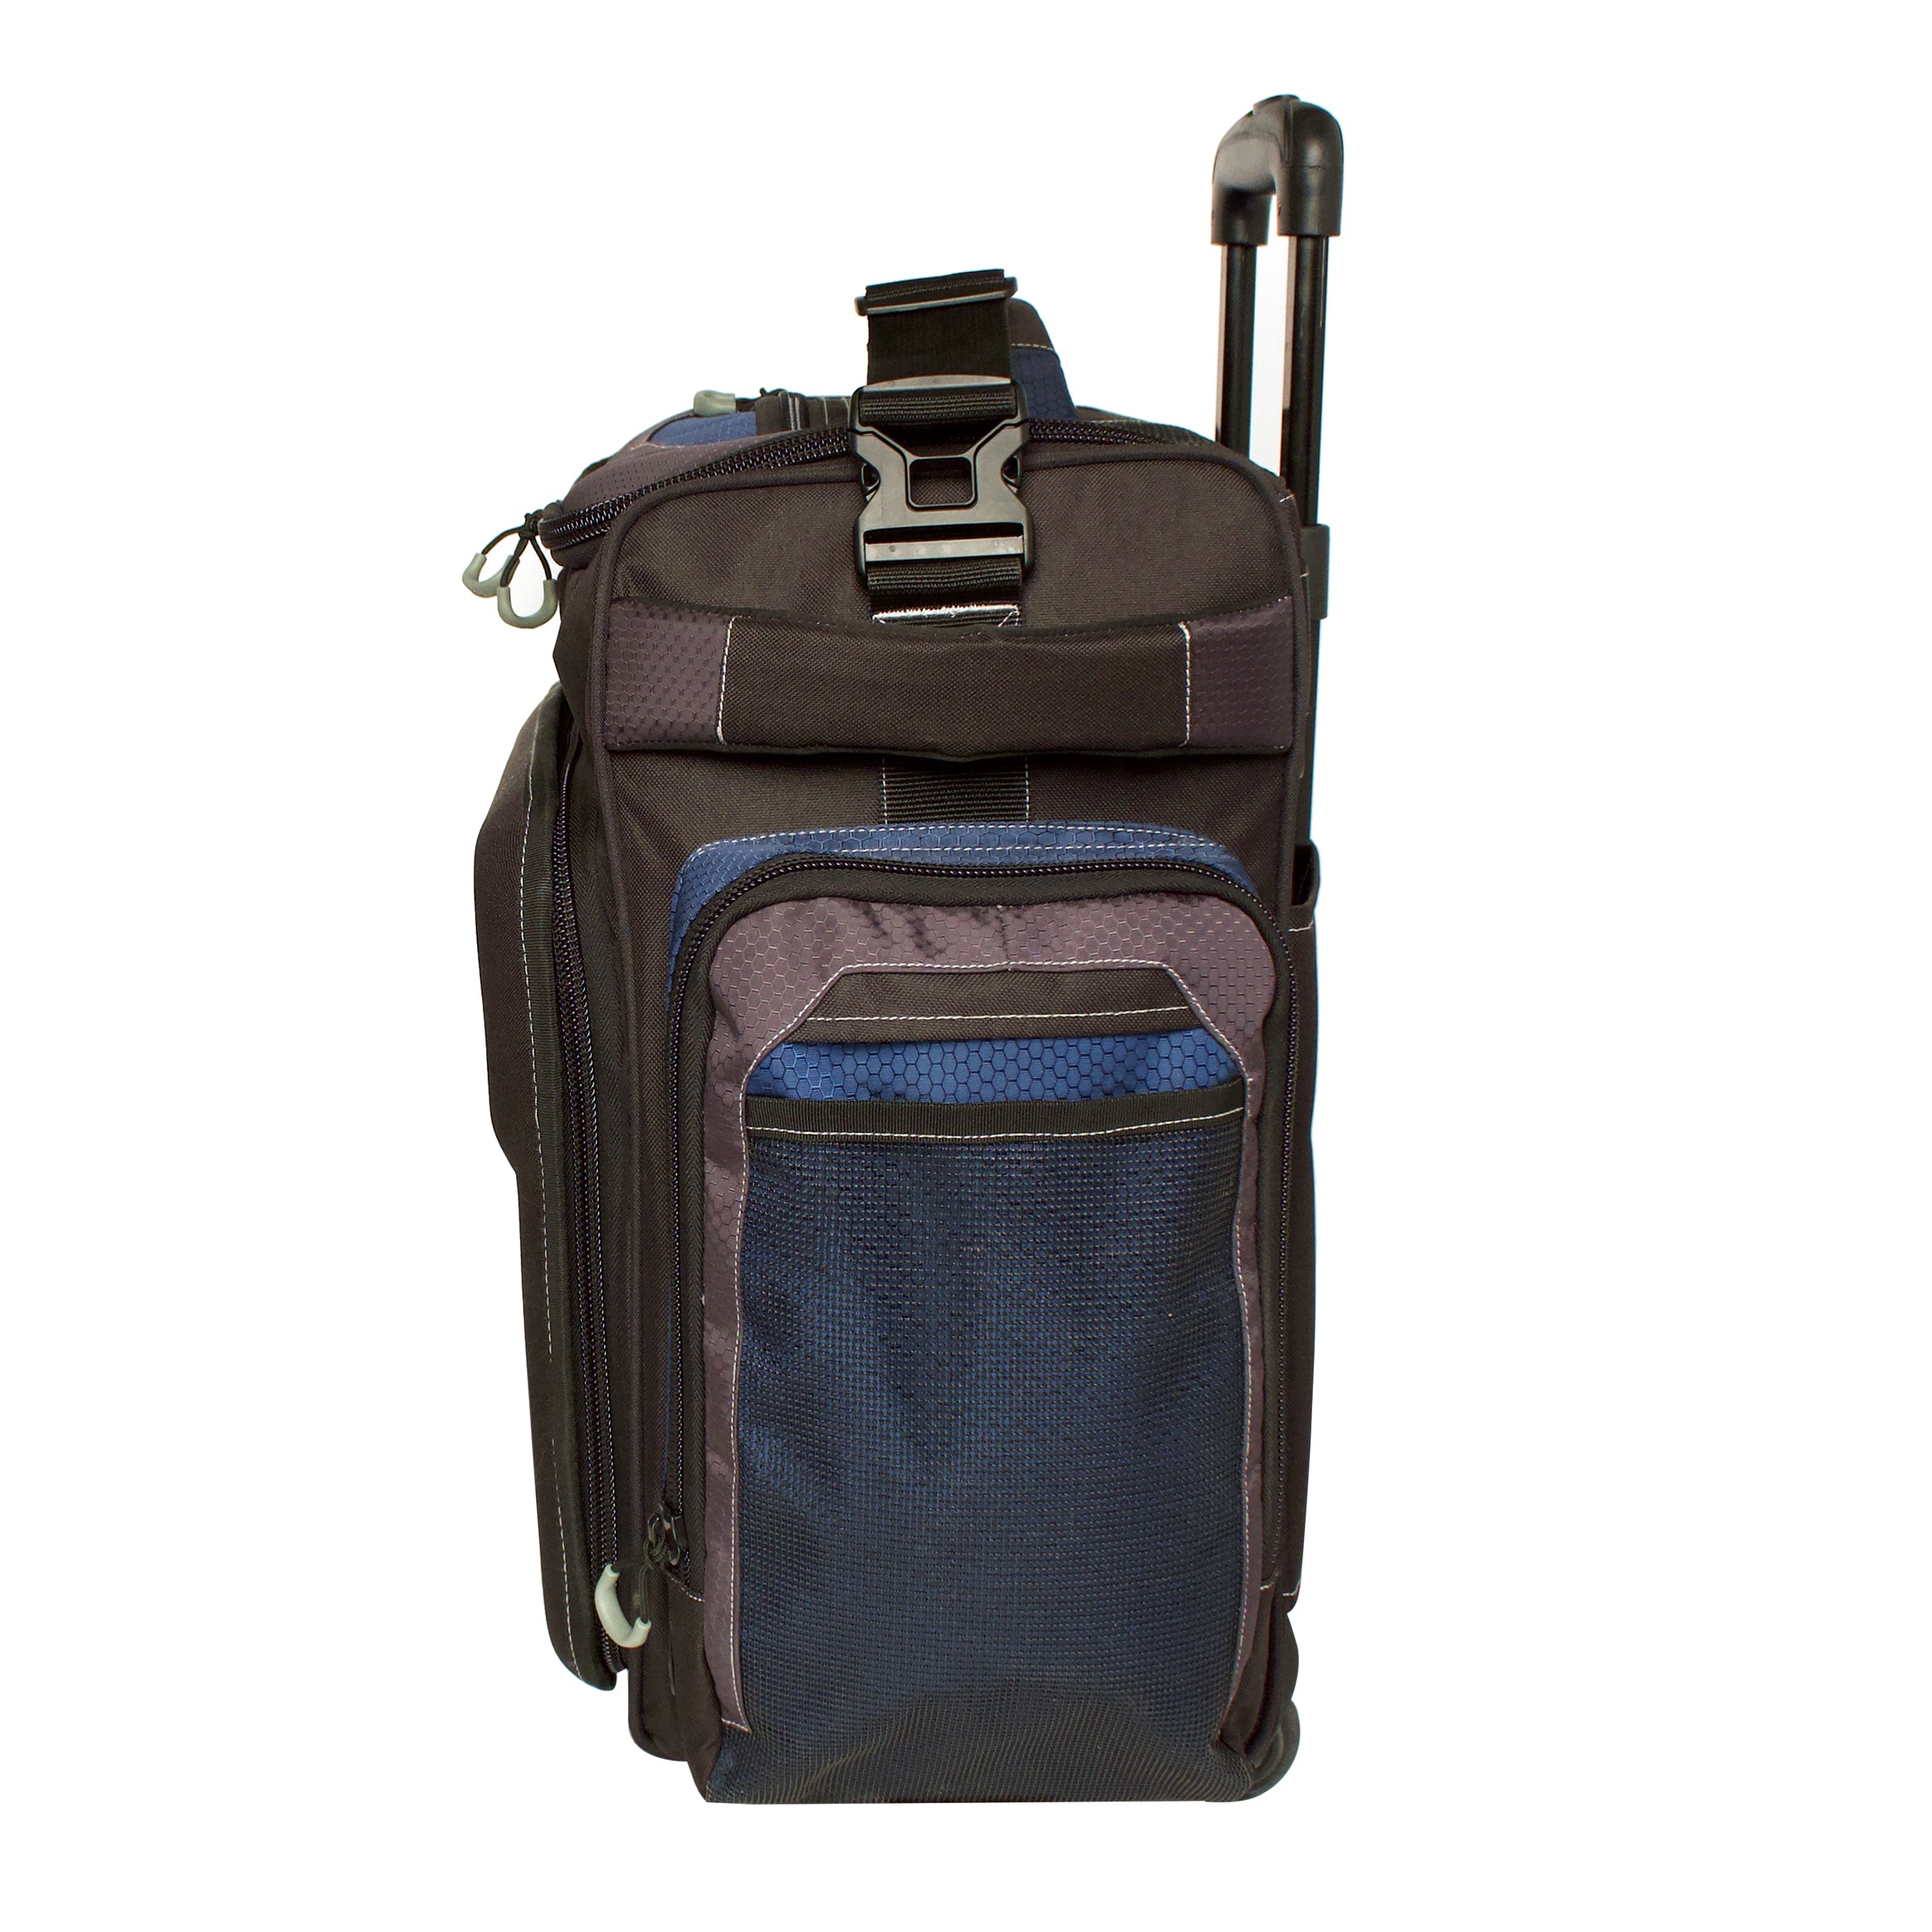 Calcutta Tackle Bag - Small - with 4 Each 360 Trays - $49.95 - CTB360-4 